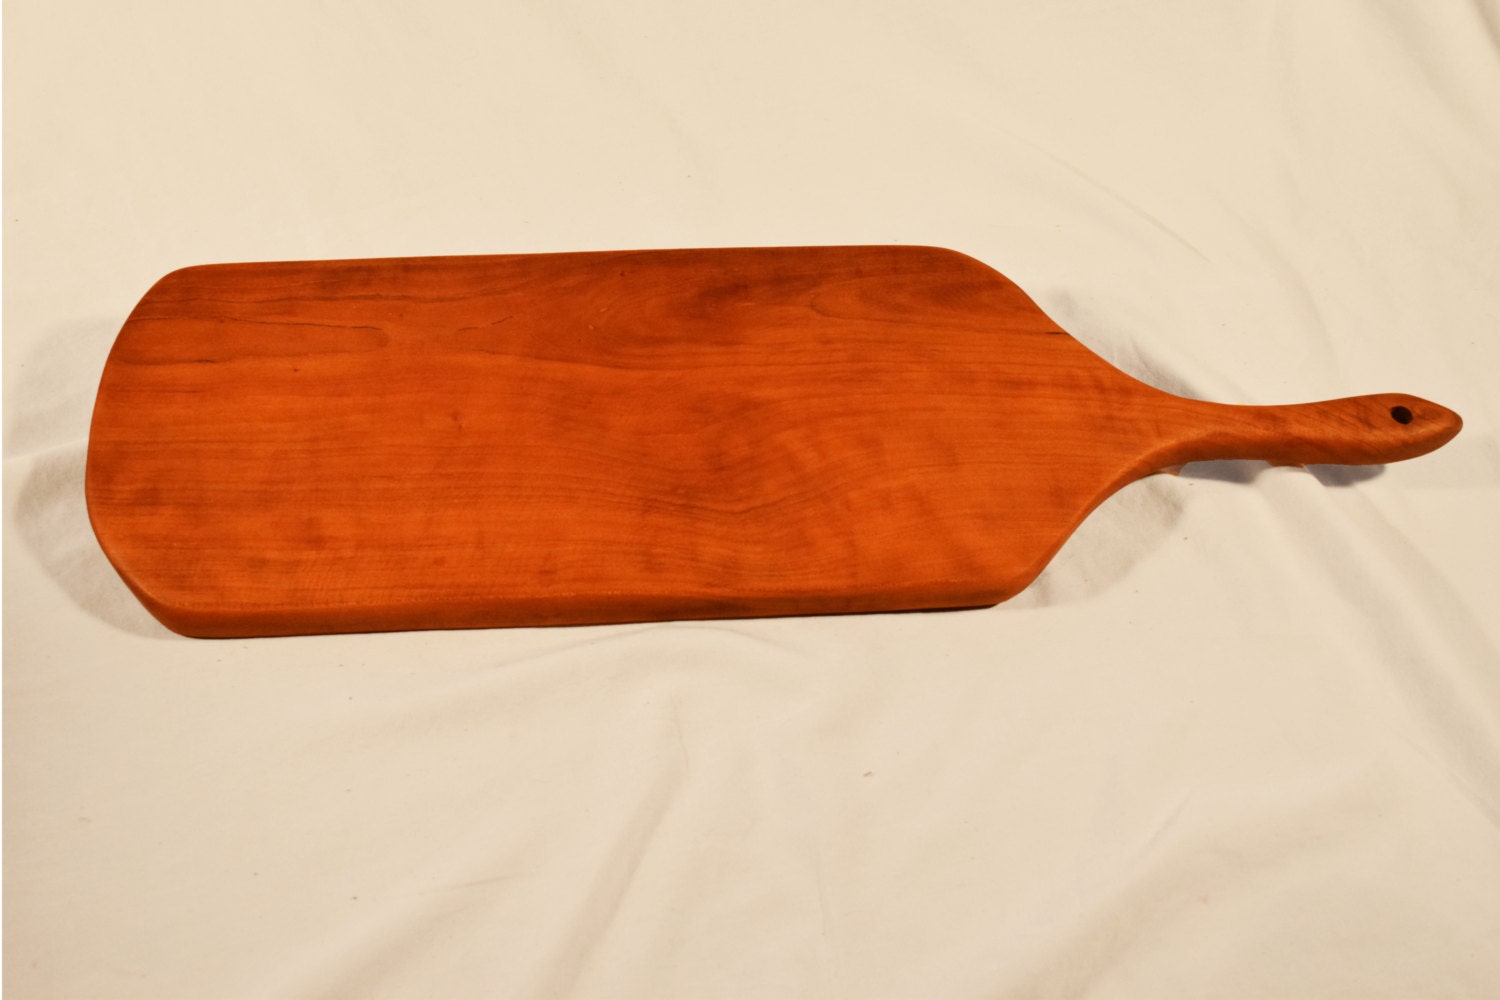 Black Cherry Wooden Cutting Board By Wascomecreations On Etsy 